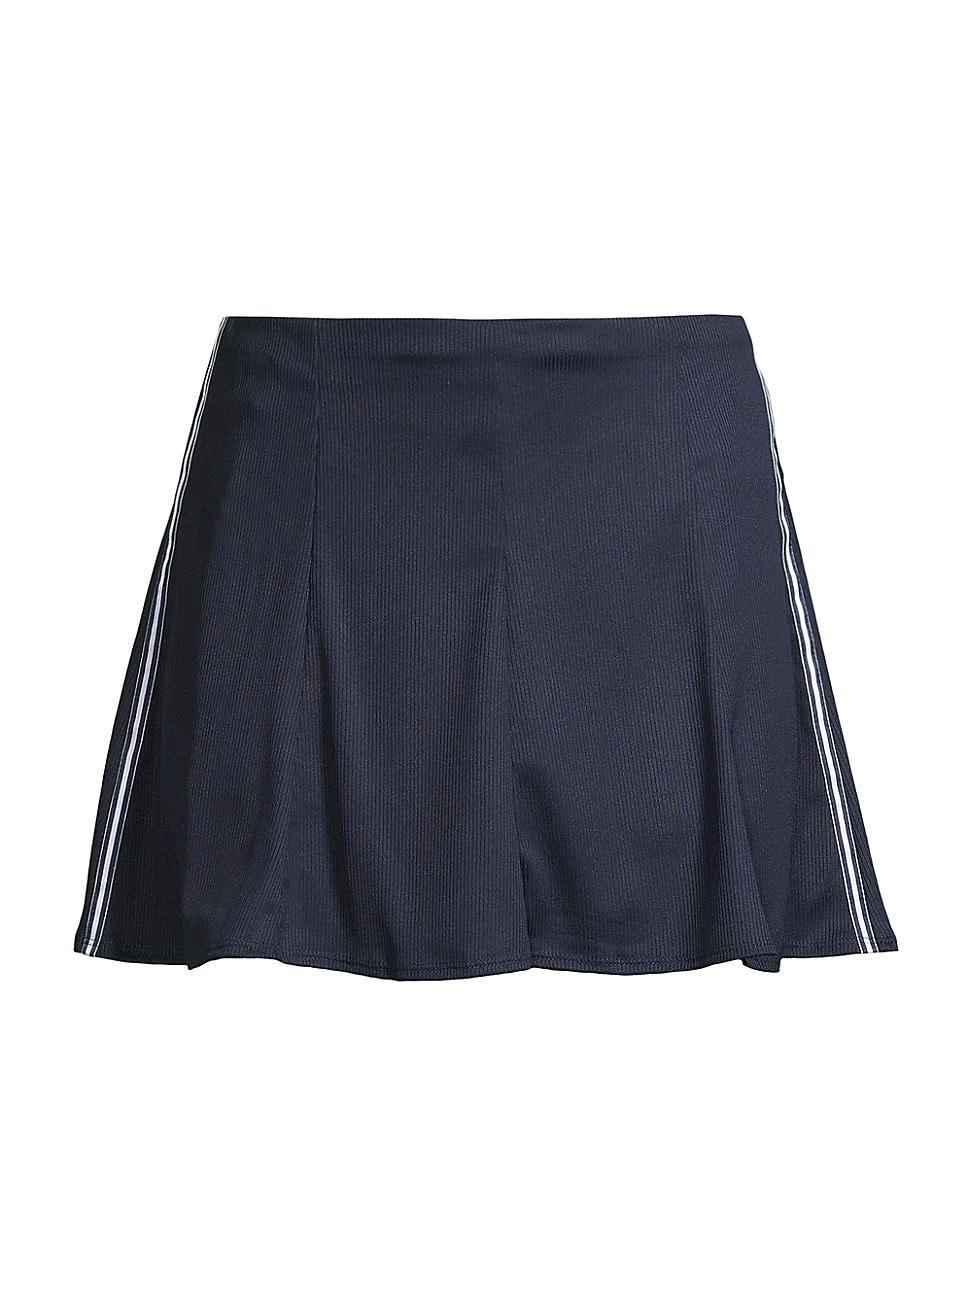 Womens Electric Toile Long Gore Hybrid Skort Product Image